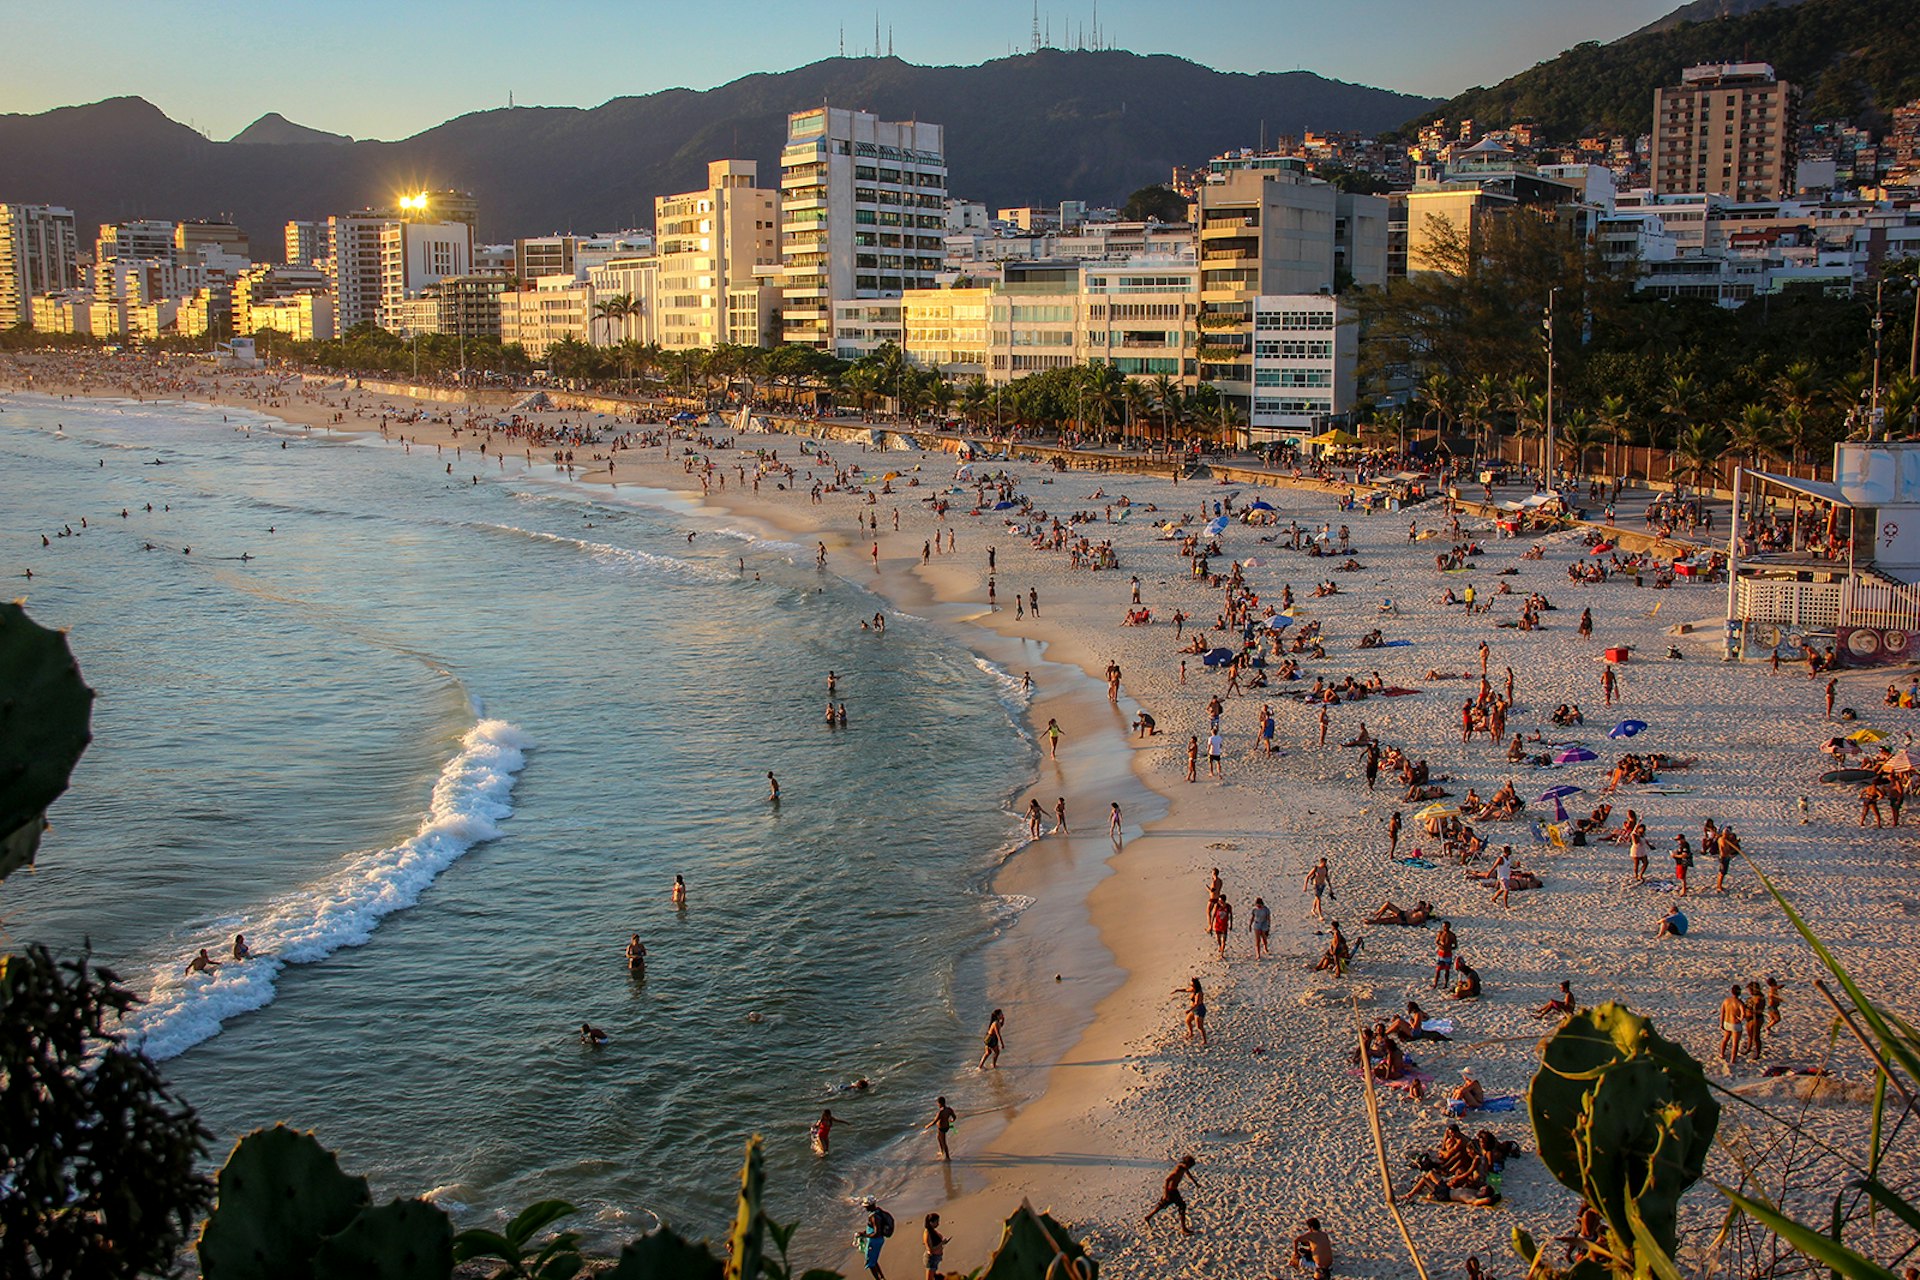 An overhead image of people on a curved beach at sunset, with city buildings lining the sand